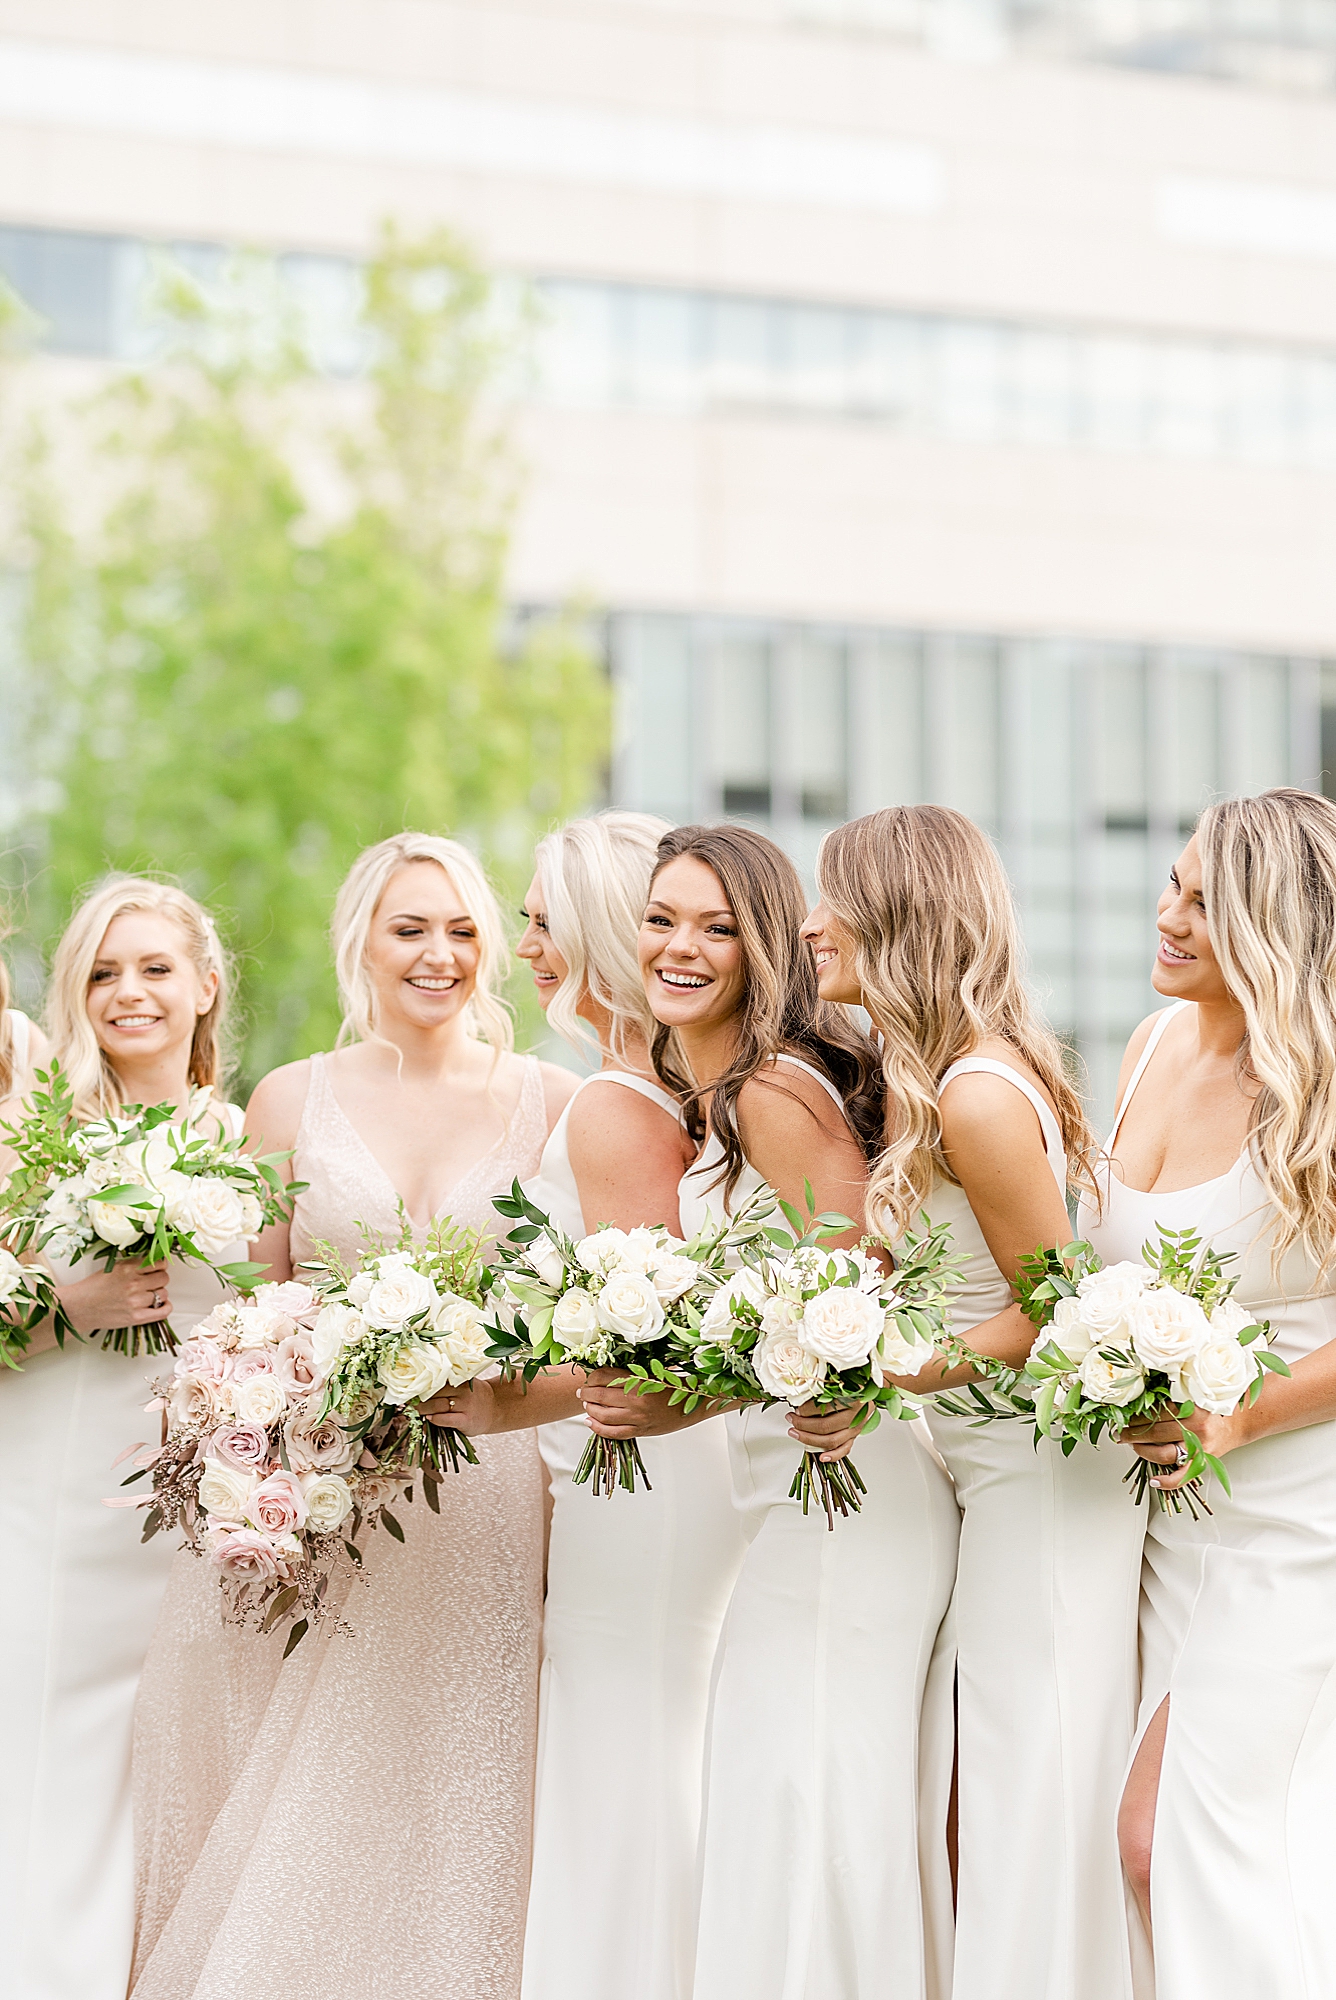 bridesmaids in white gowns smile with bride in blush wedding dress